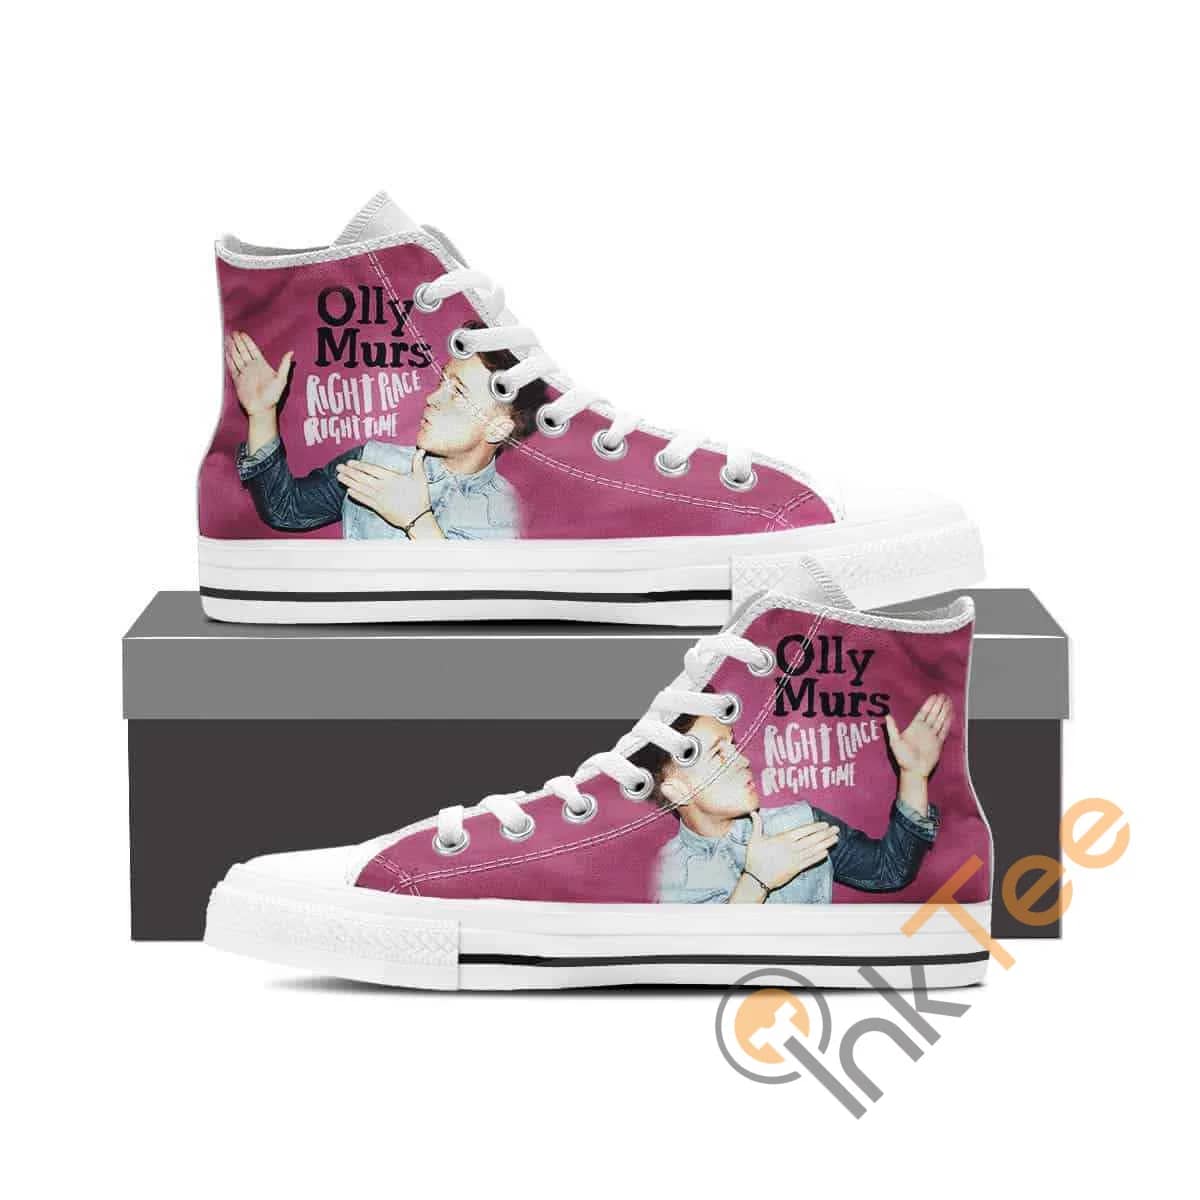 Olly Murs Amazon Best Seller Sku 2096 High Top Shoes